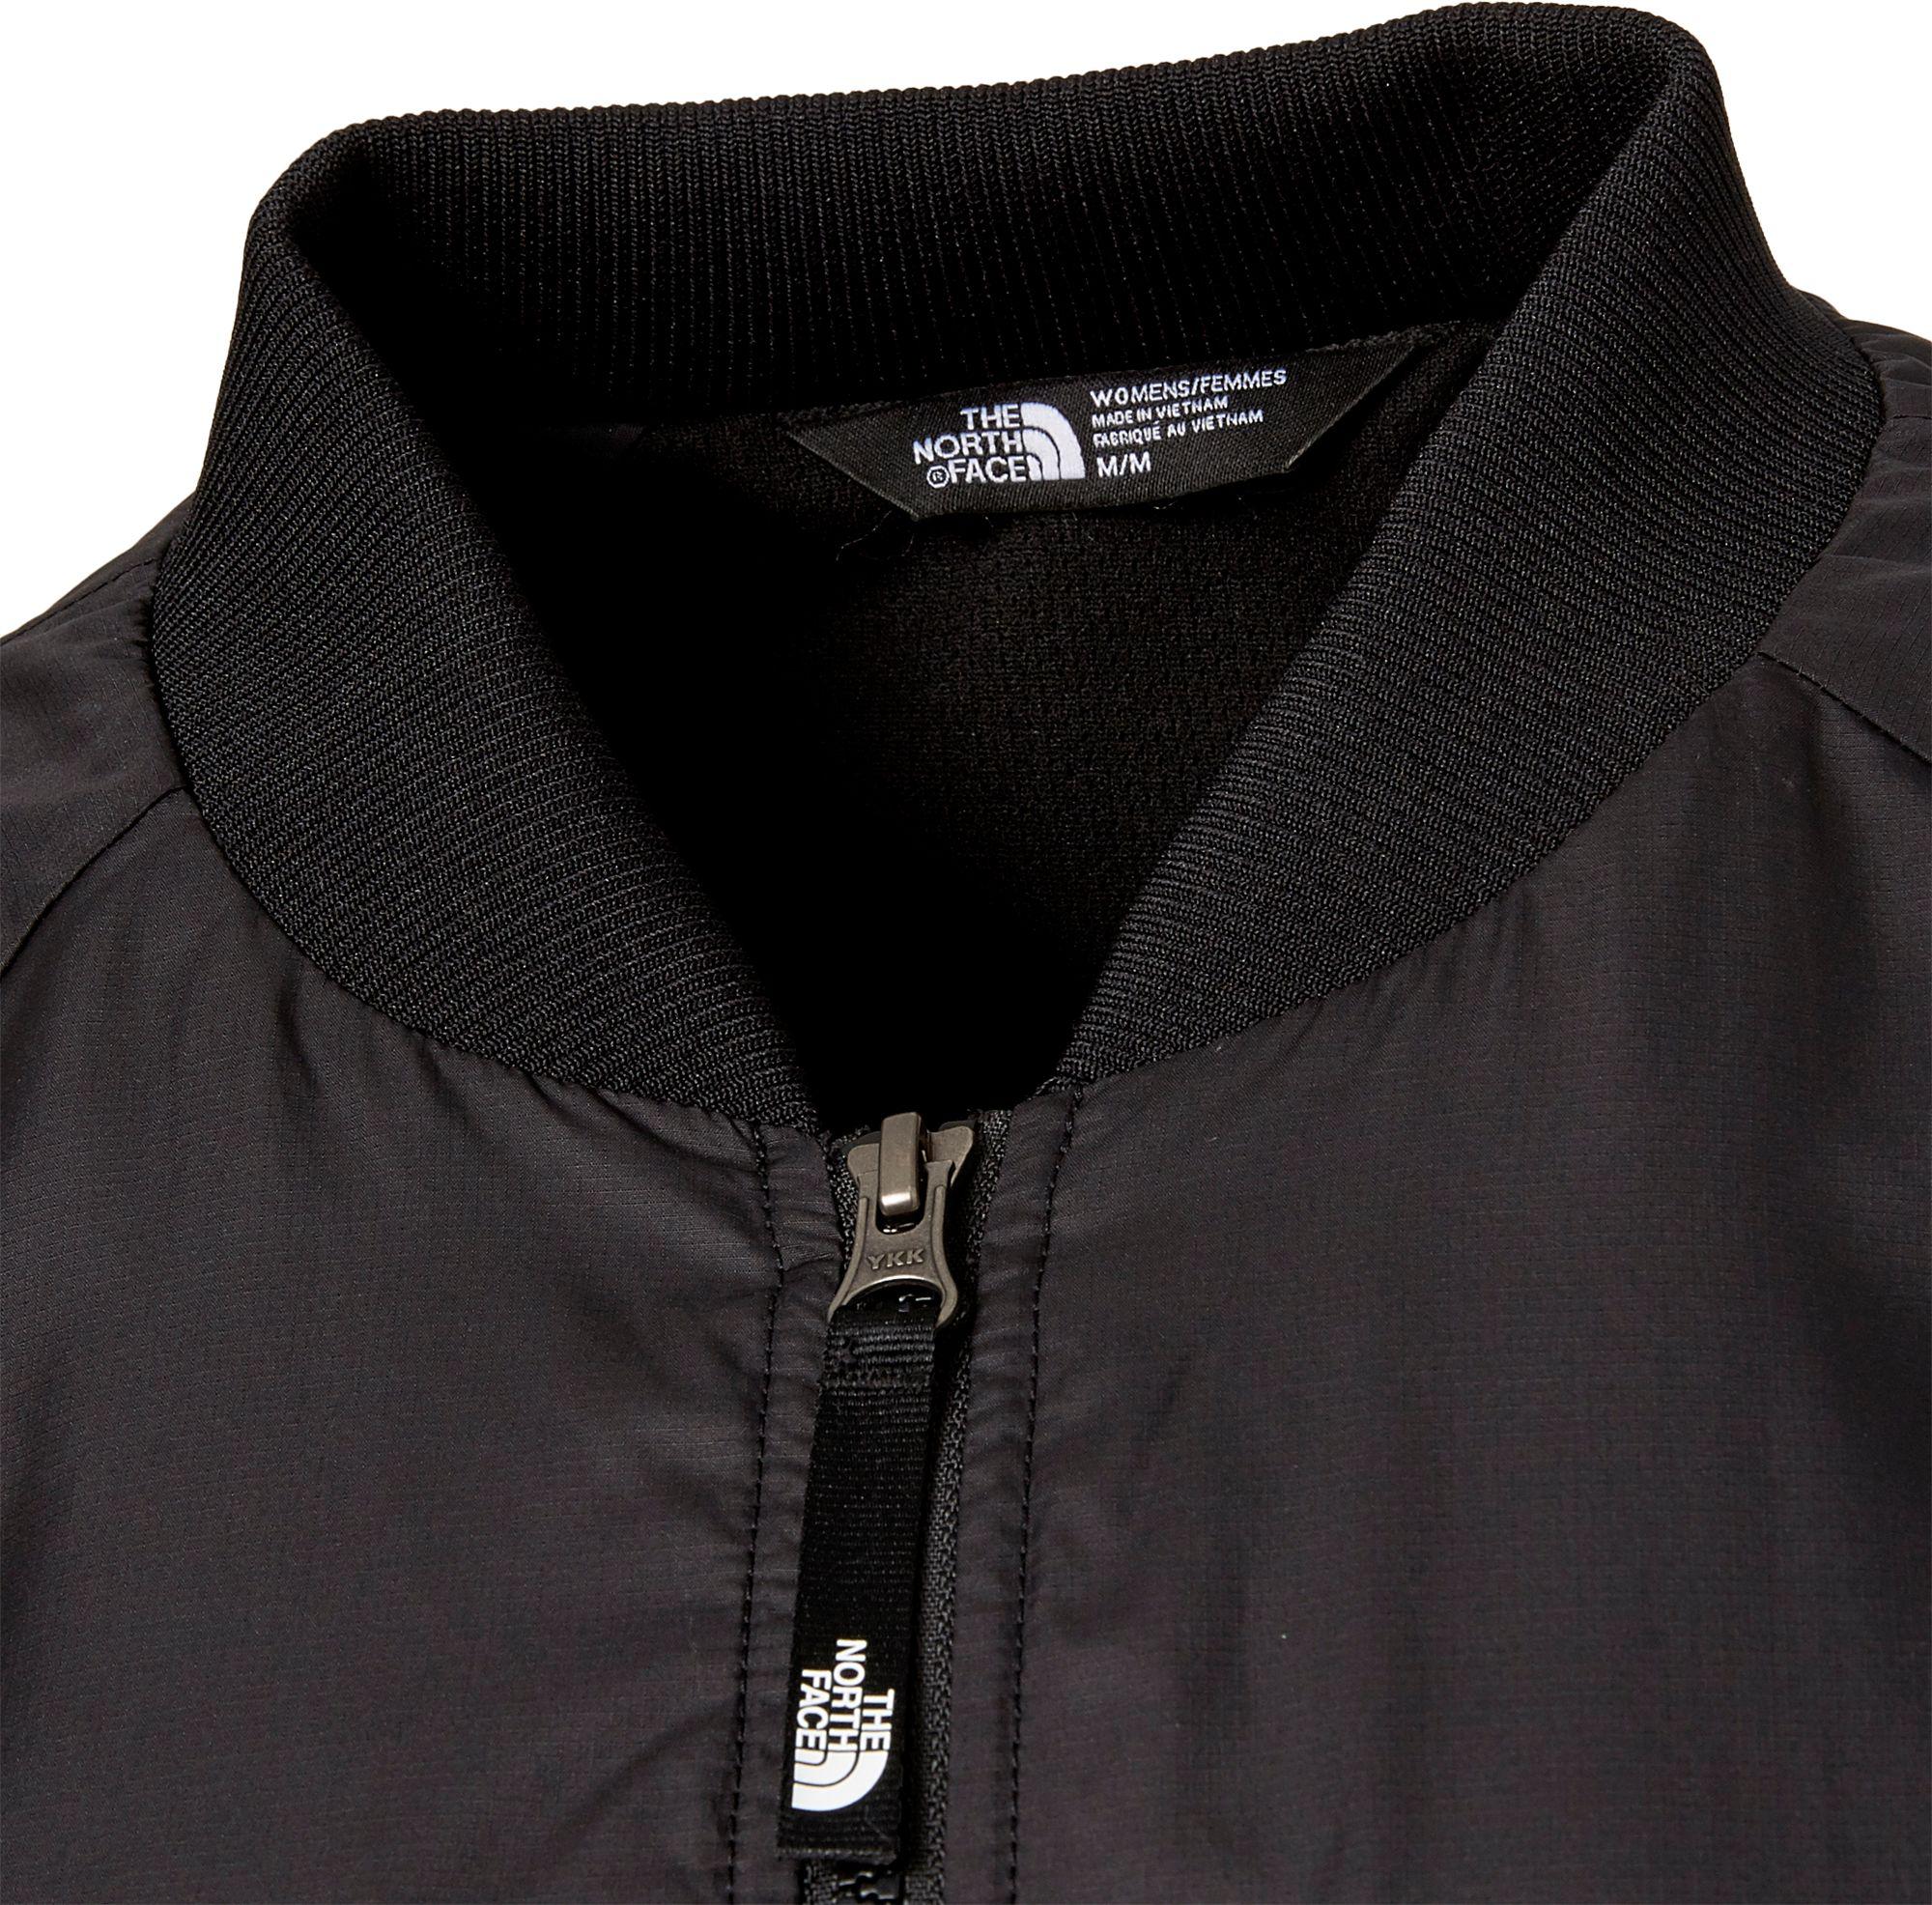 the north face women's flurry wind bomber